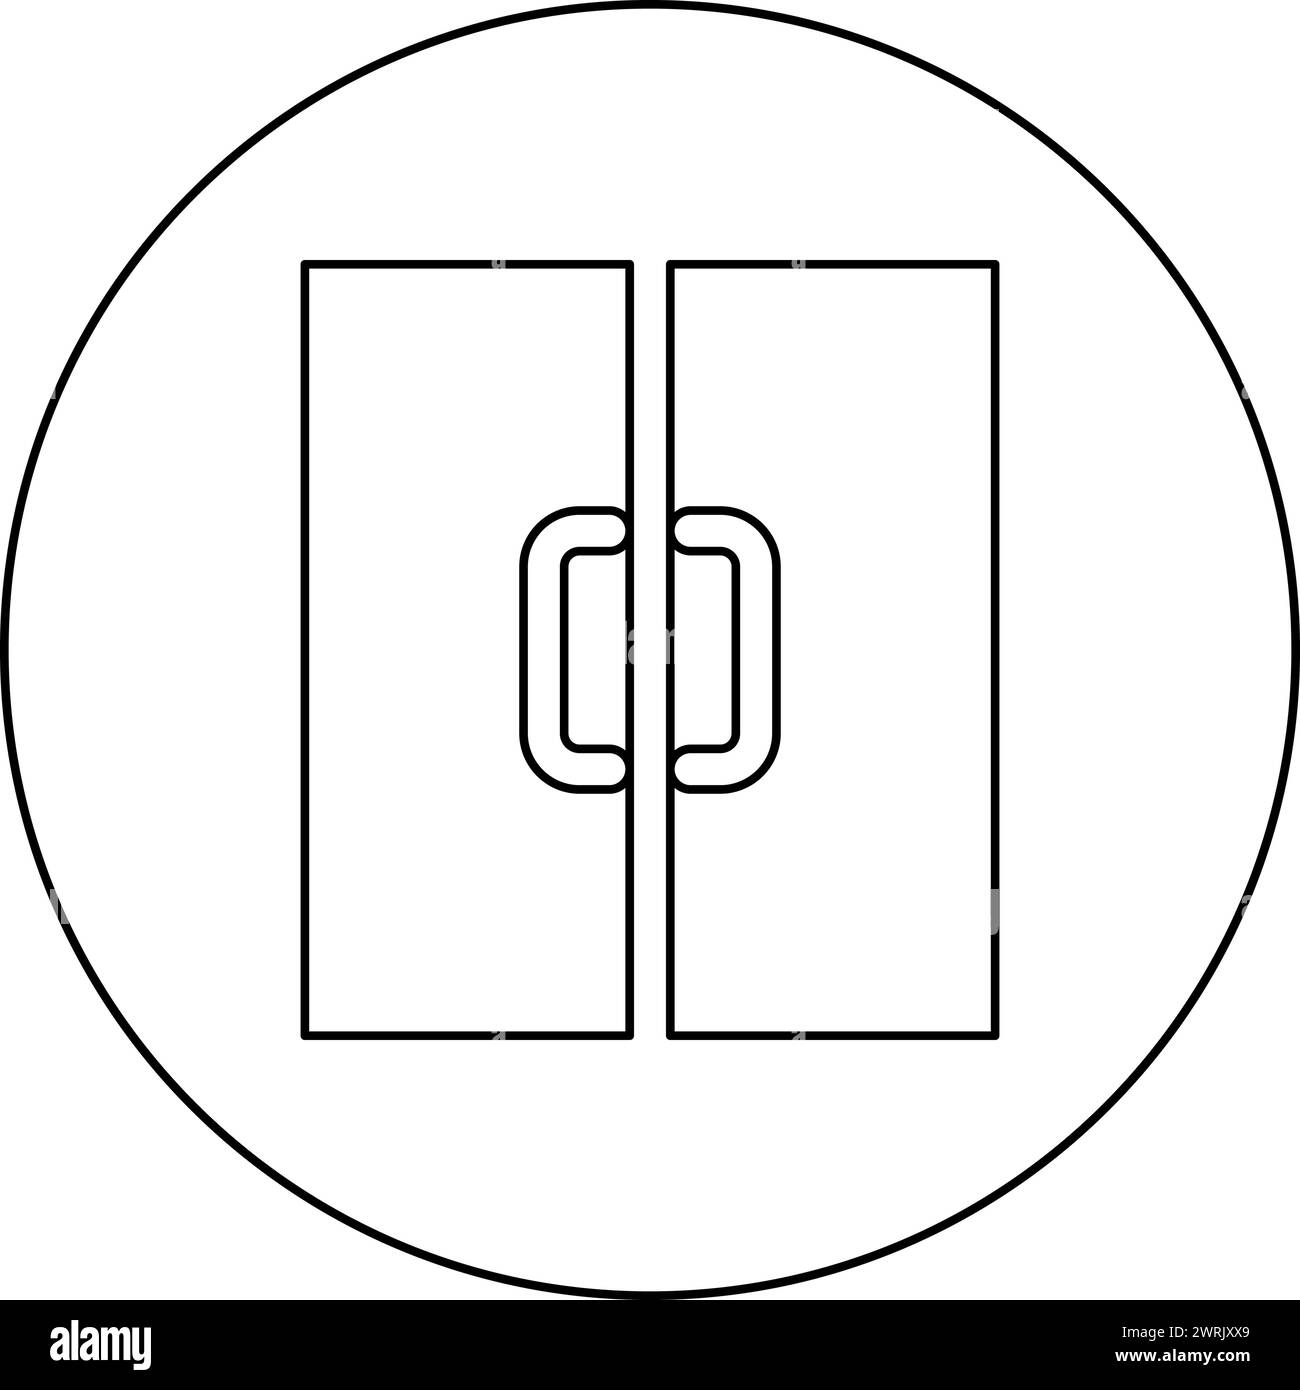 Double door exit doorway icon in circle round black color vector illustration image outline contour line thin style simple Stock Vector